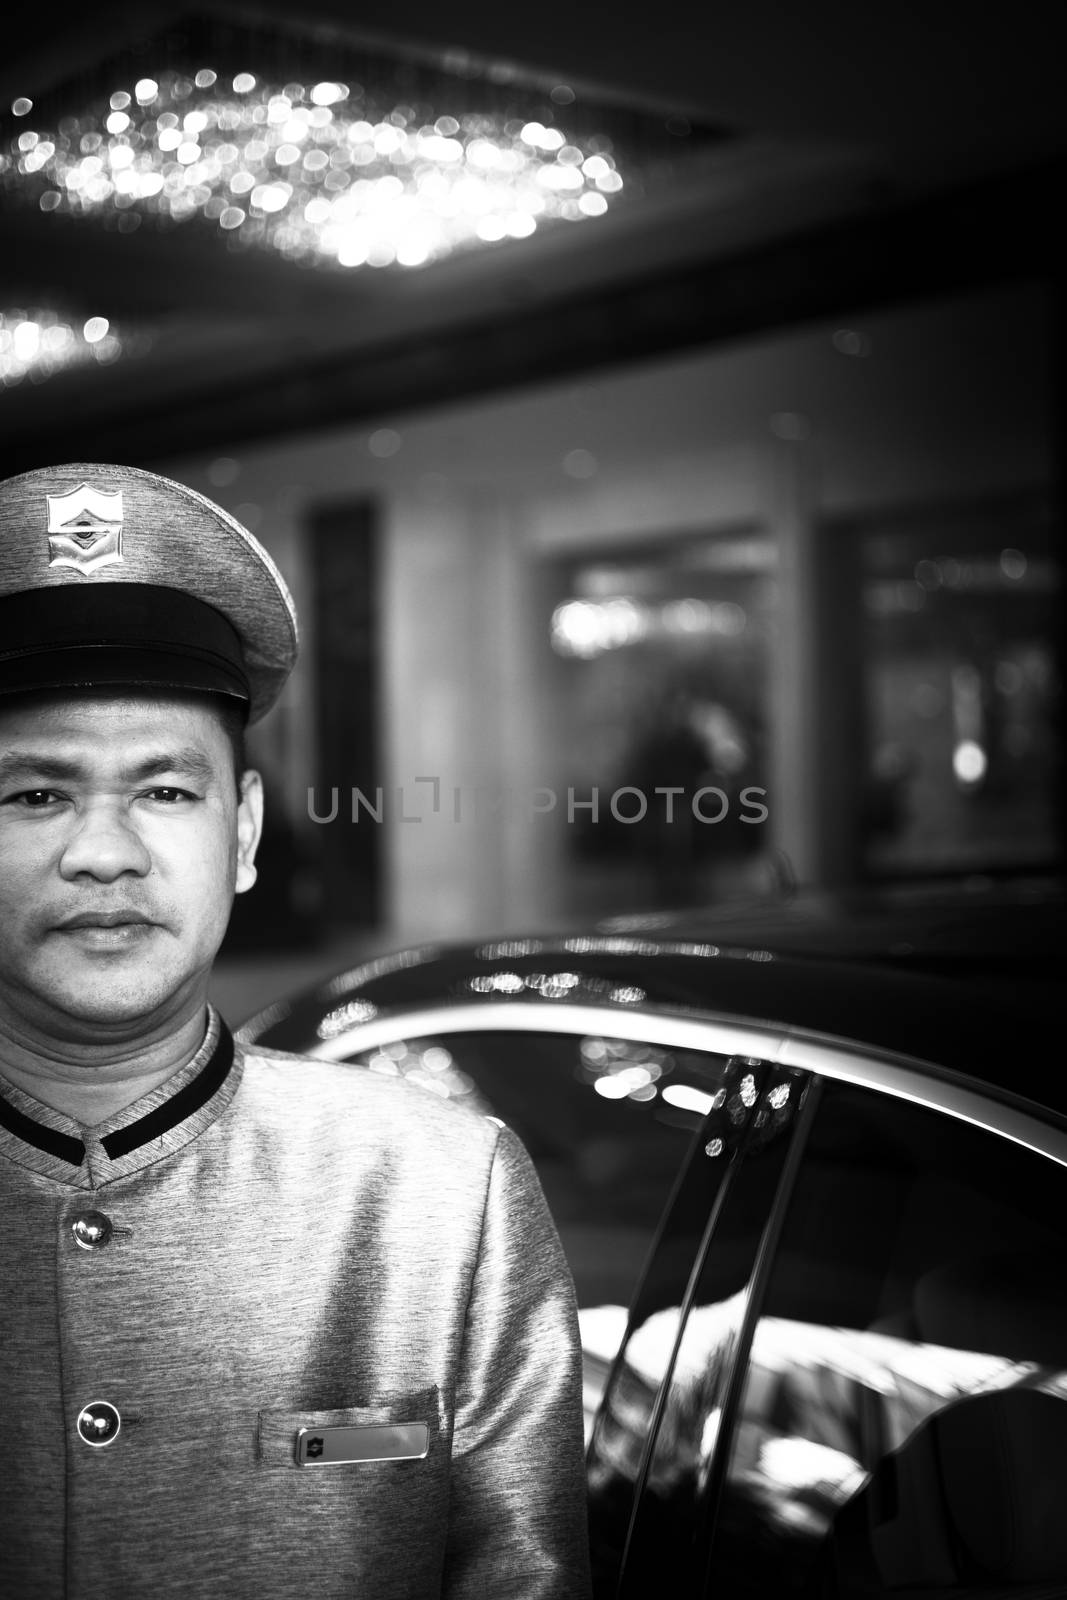 Bangkok, Thailand - November 29, 2013: Parking attendant standing outside luxury five star gran luxe hotel in Bangkok dowtown in Thailand wearing silk Thai uniform. 

Black and white high contrast digital photo of a parking attendant in posh silk Thai uniform and cap outside a luxury five star hotel in Bangkok Thailand with hotel and luxury car behind out of focus. Shallow dof depth of focus and bokeh effect. 
